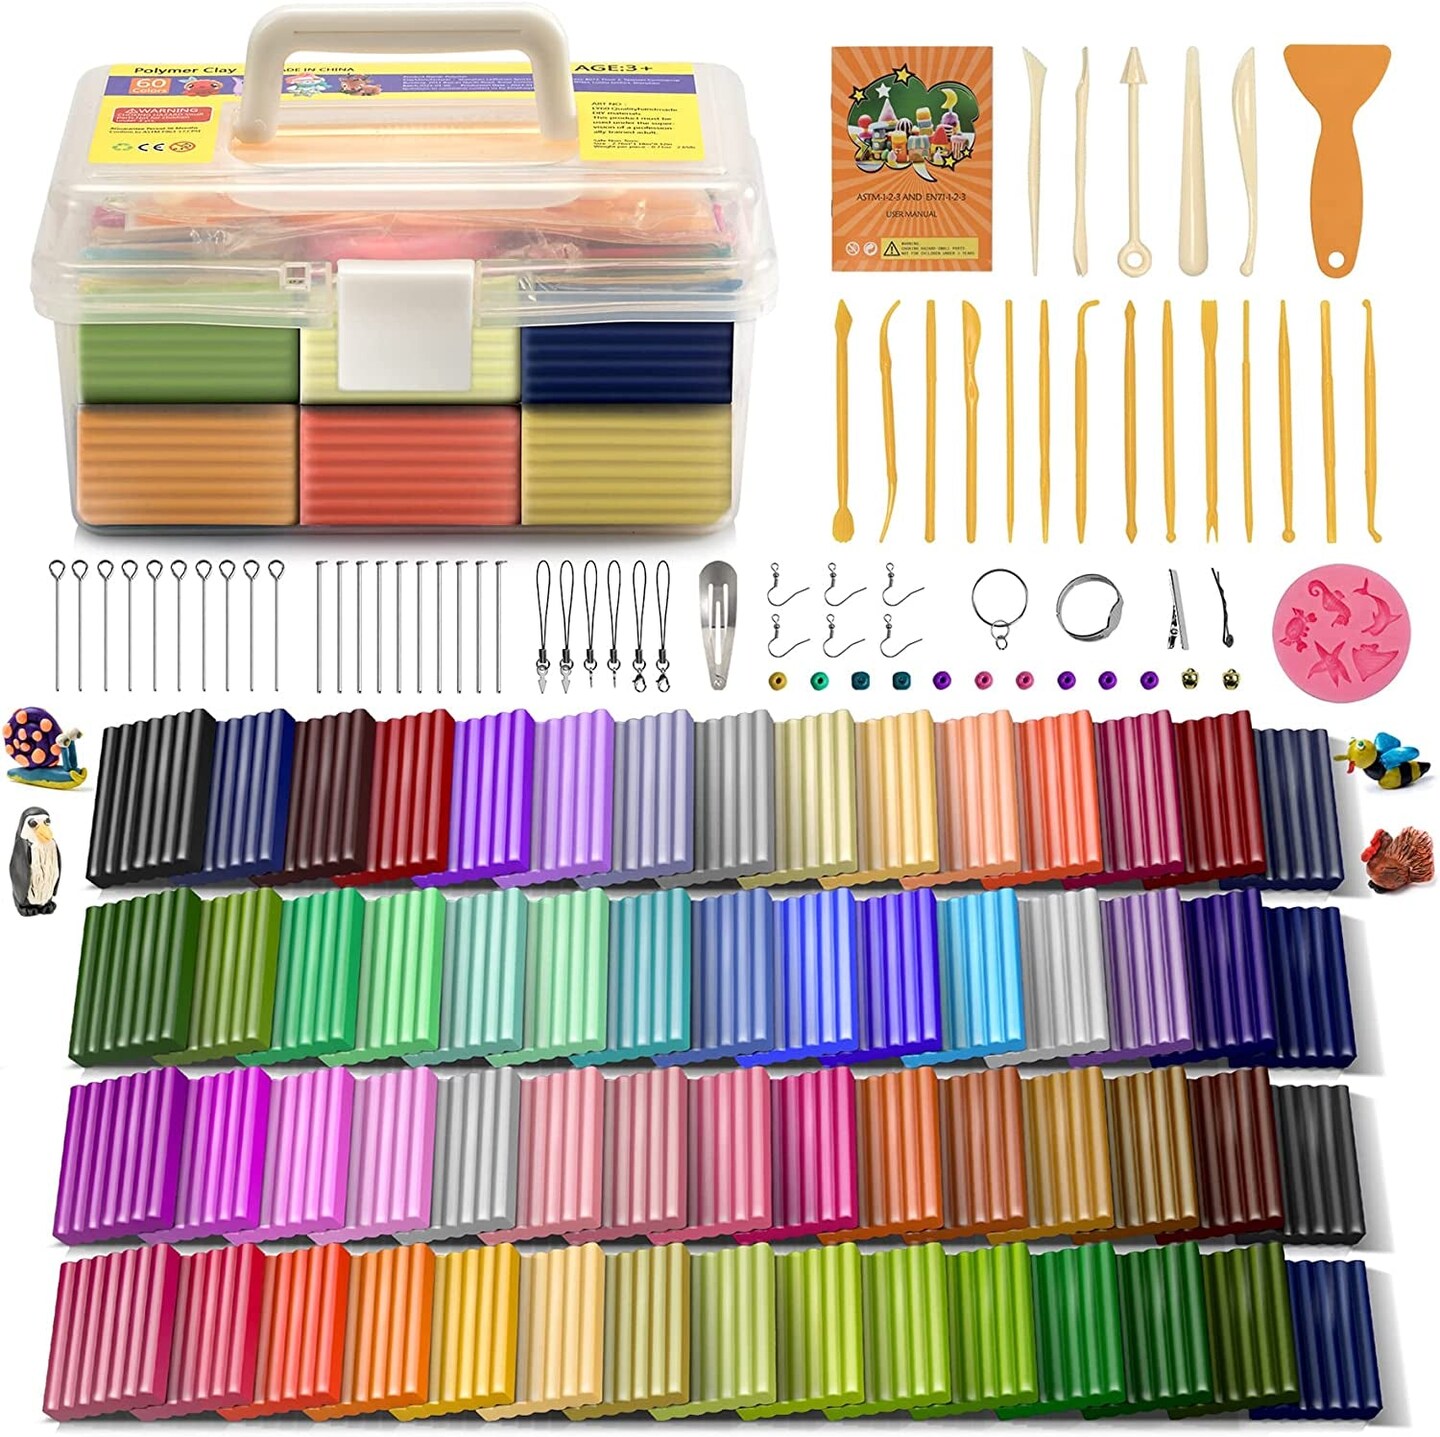 Polymer Clay 50 Colors, Modeling Clay for Kids DIY Starter Kits, Oven Baked Model  Clay, Non-Toxic, Non-Sticky,With Sculpting Tools, Gift for Children and  Artists (50 Colors A)